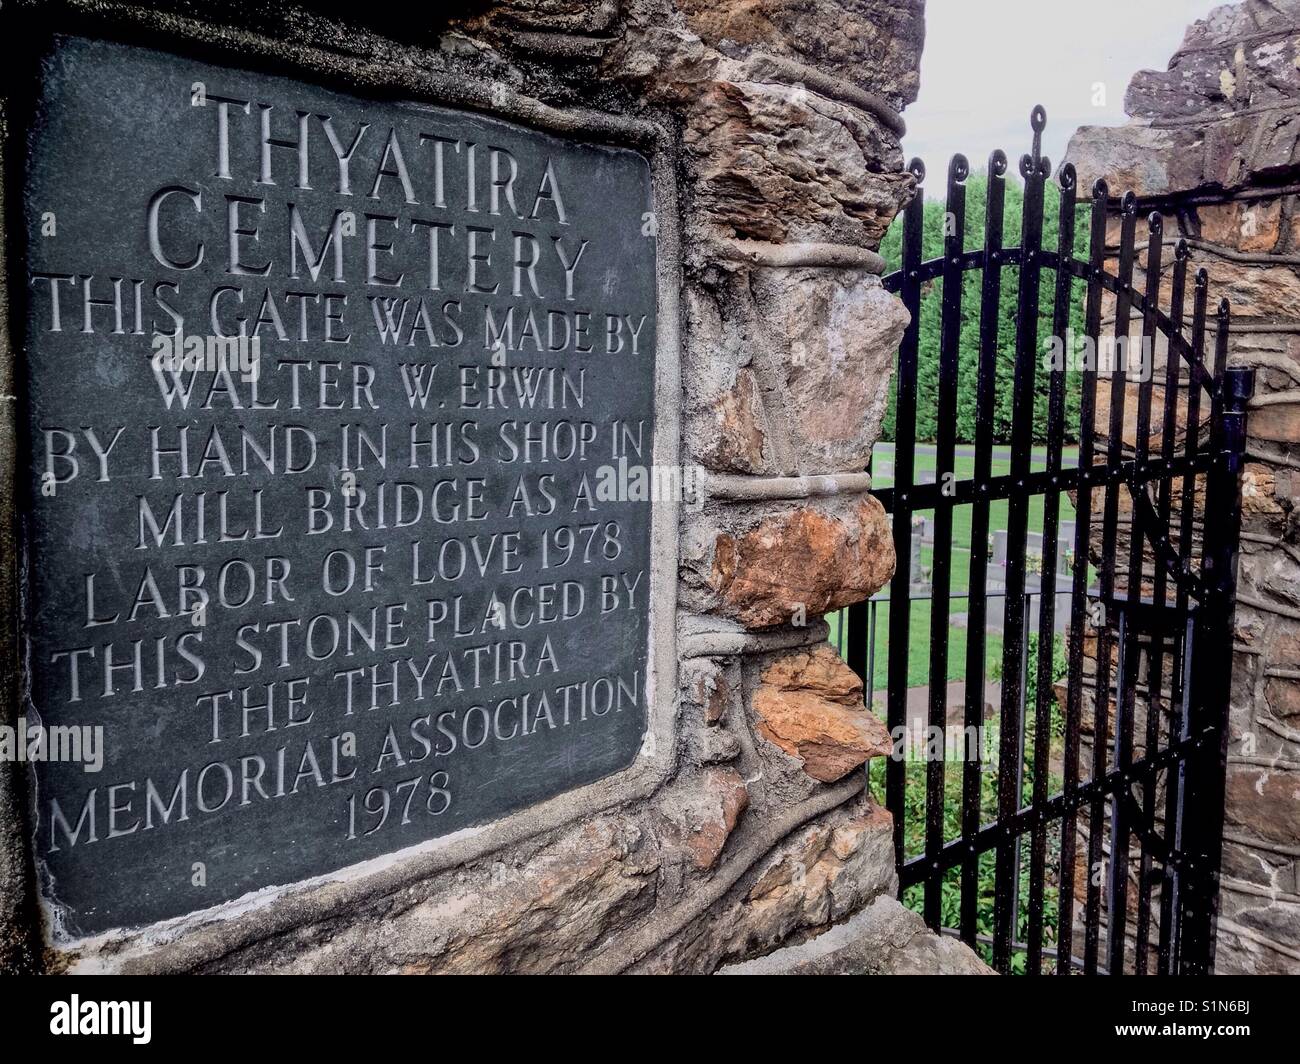 Sign stating Gate made by Walter W. Erwin Thyatira cemetery in Millbridge, North Carolina as a labor of love is on stone column supporting wrought iron gate - North Carolina Stock Photo